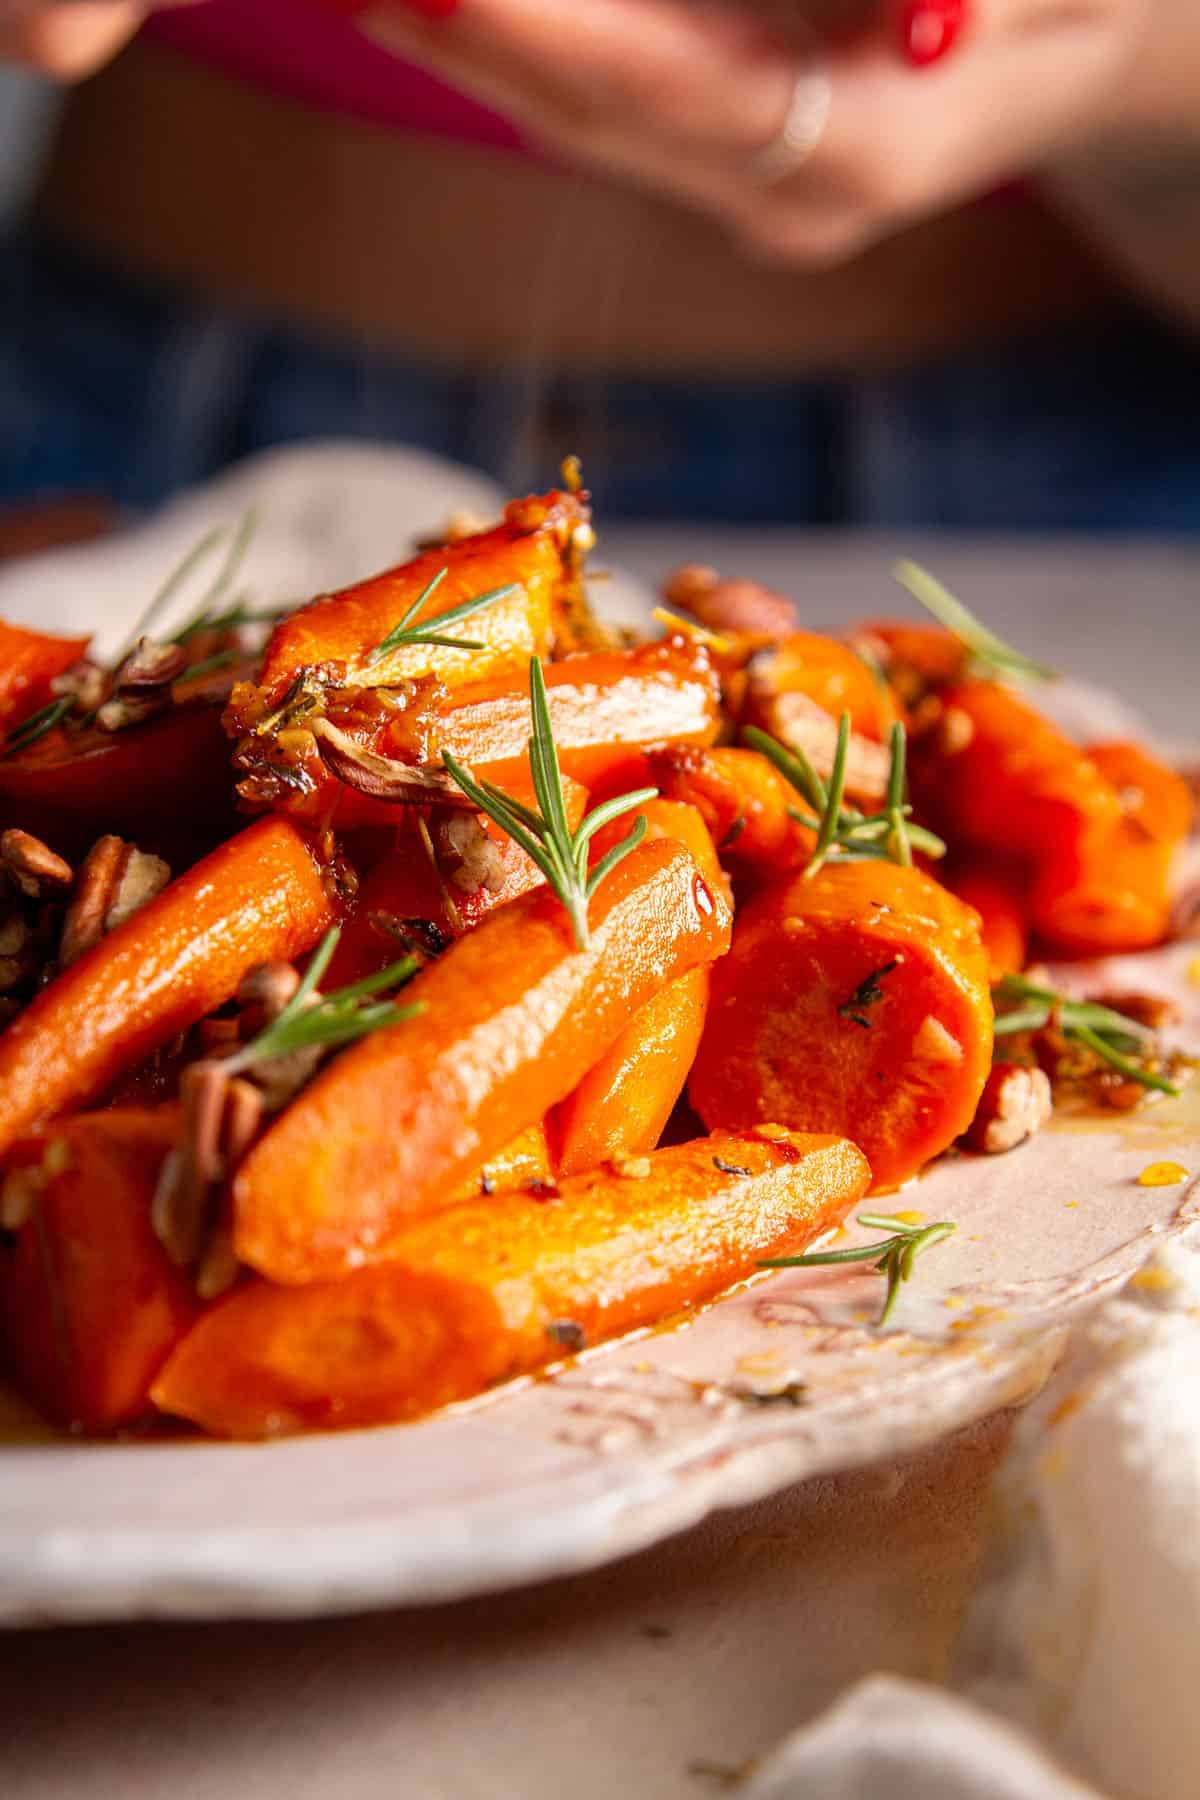 steaming carrots on white plate